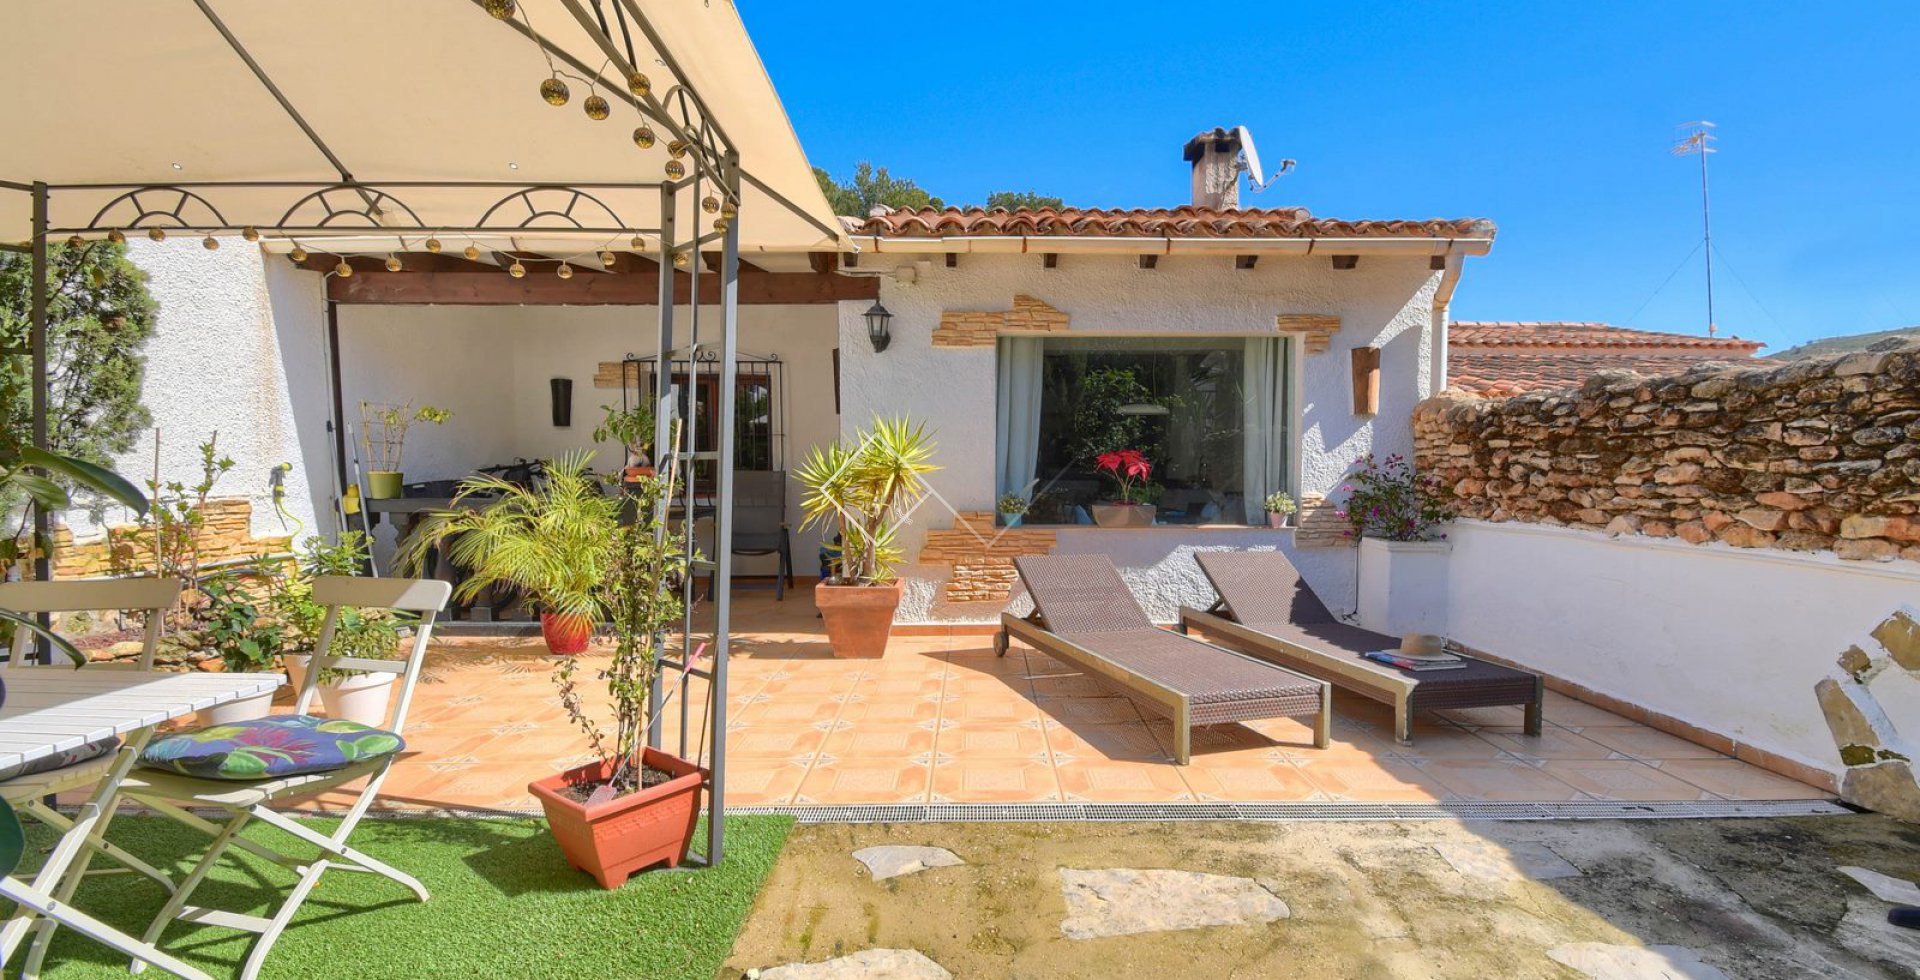 Bungalow - Attached house for sale in Moraira, El Portet